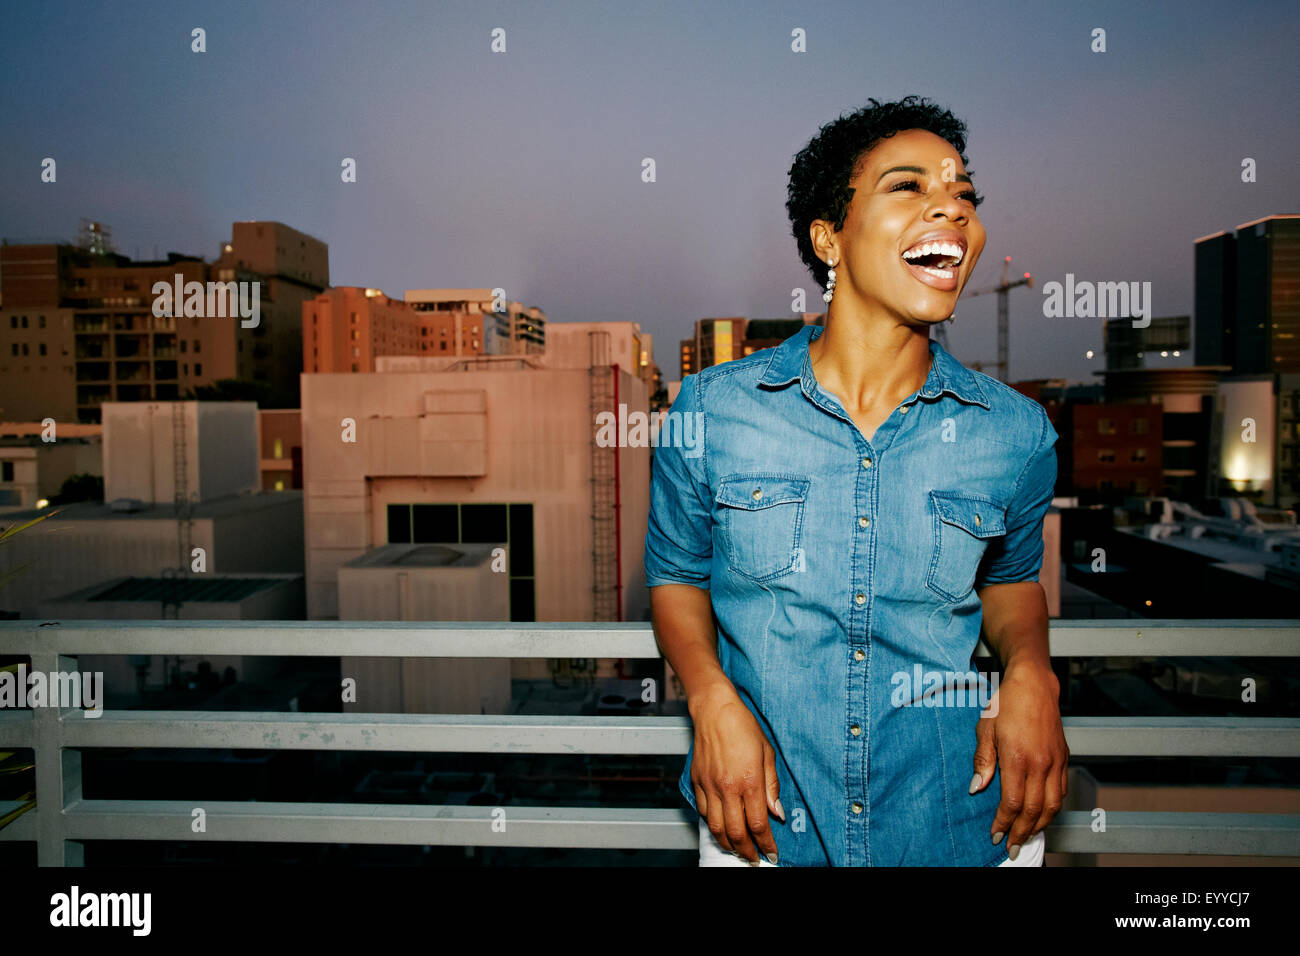 Woman laughing on urban rooftop Stock Photo